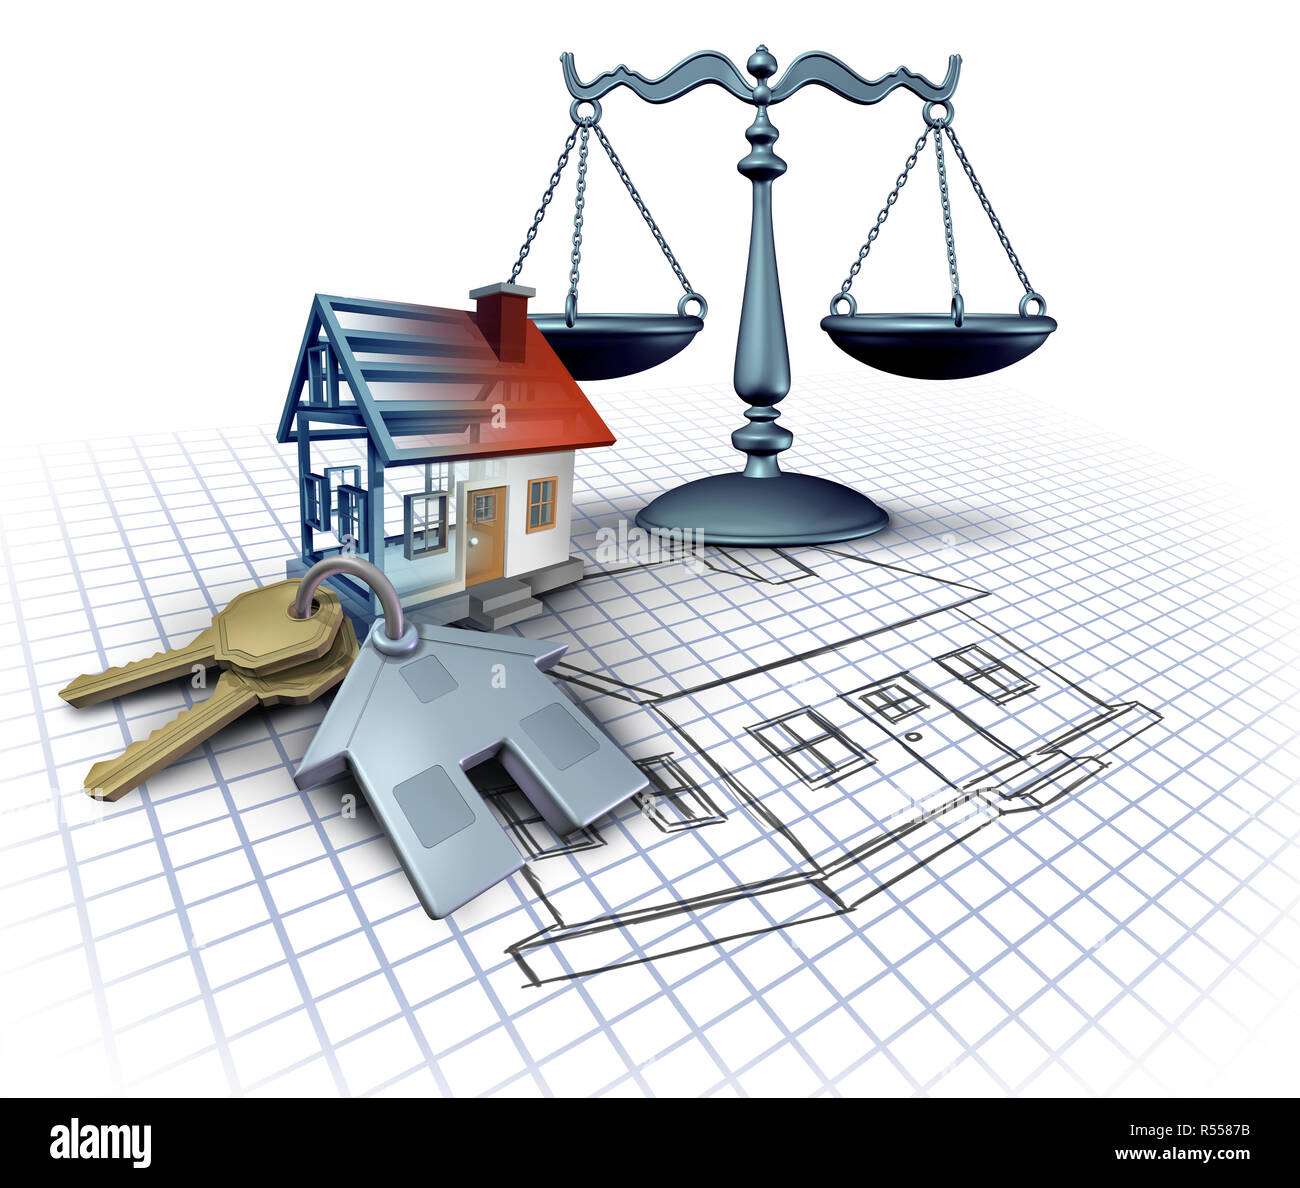 Home construction law and legal building codes as a real estate legislation featuring blue print plans with house keys. Stock Photo